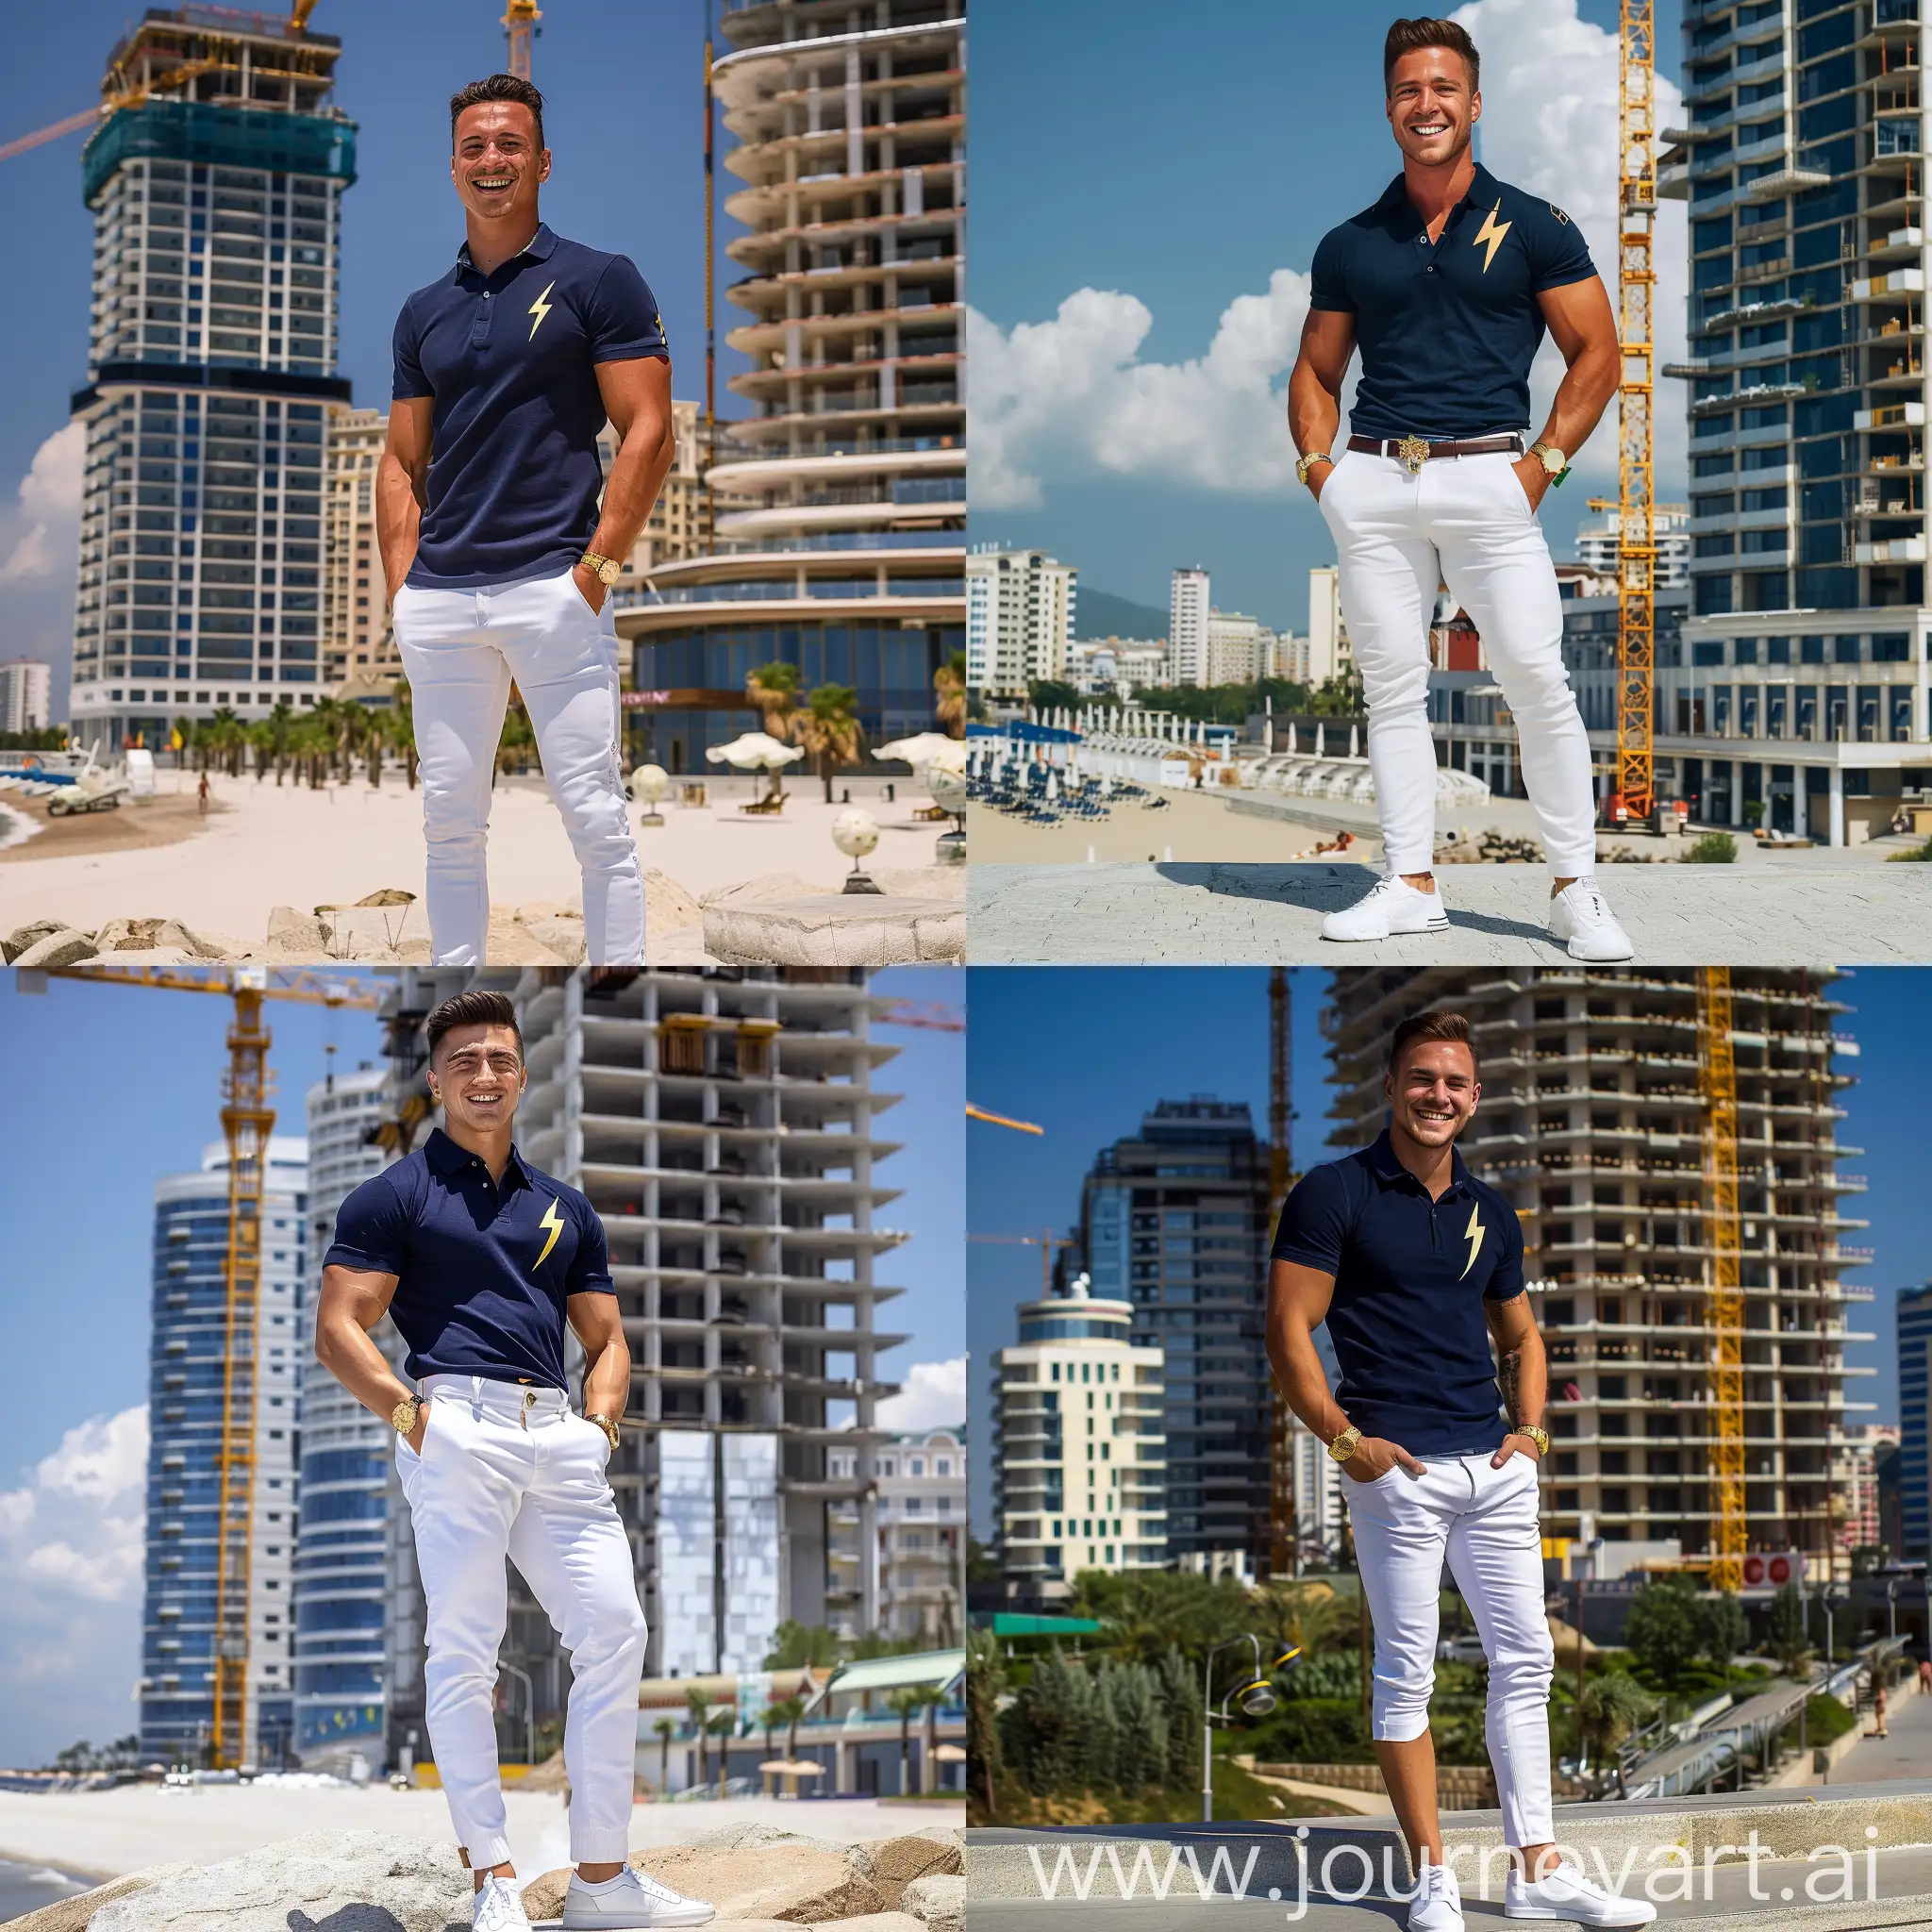 Smiling-Man-in-Dark-Blue-Polo-Shirt-with-Skyscraper-Under-Construction-Background